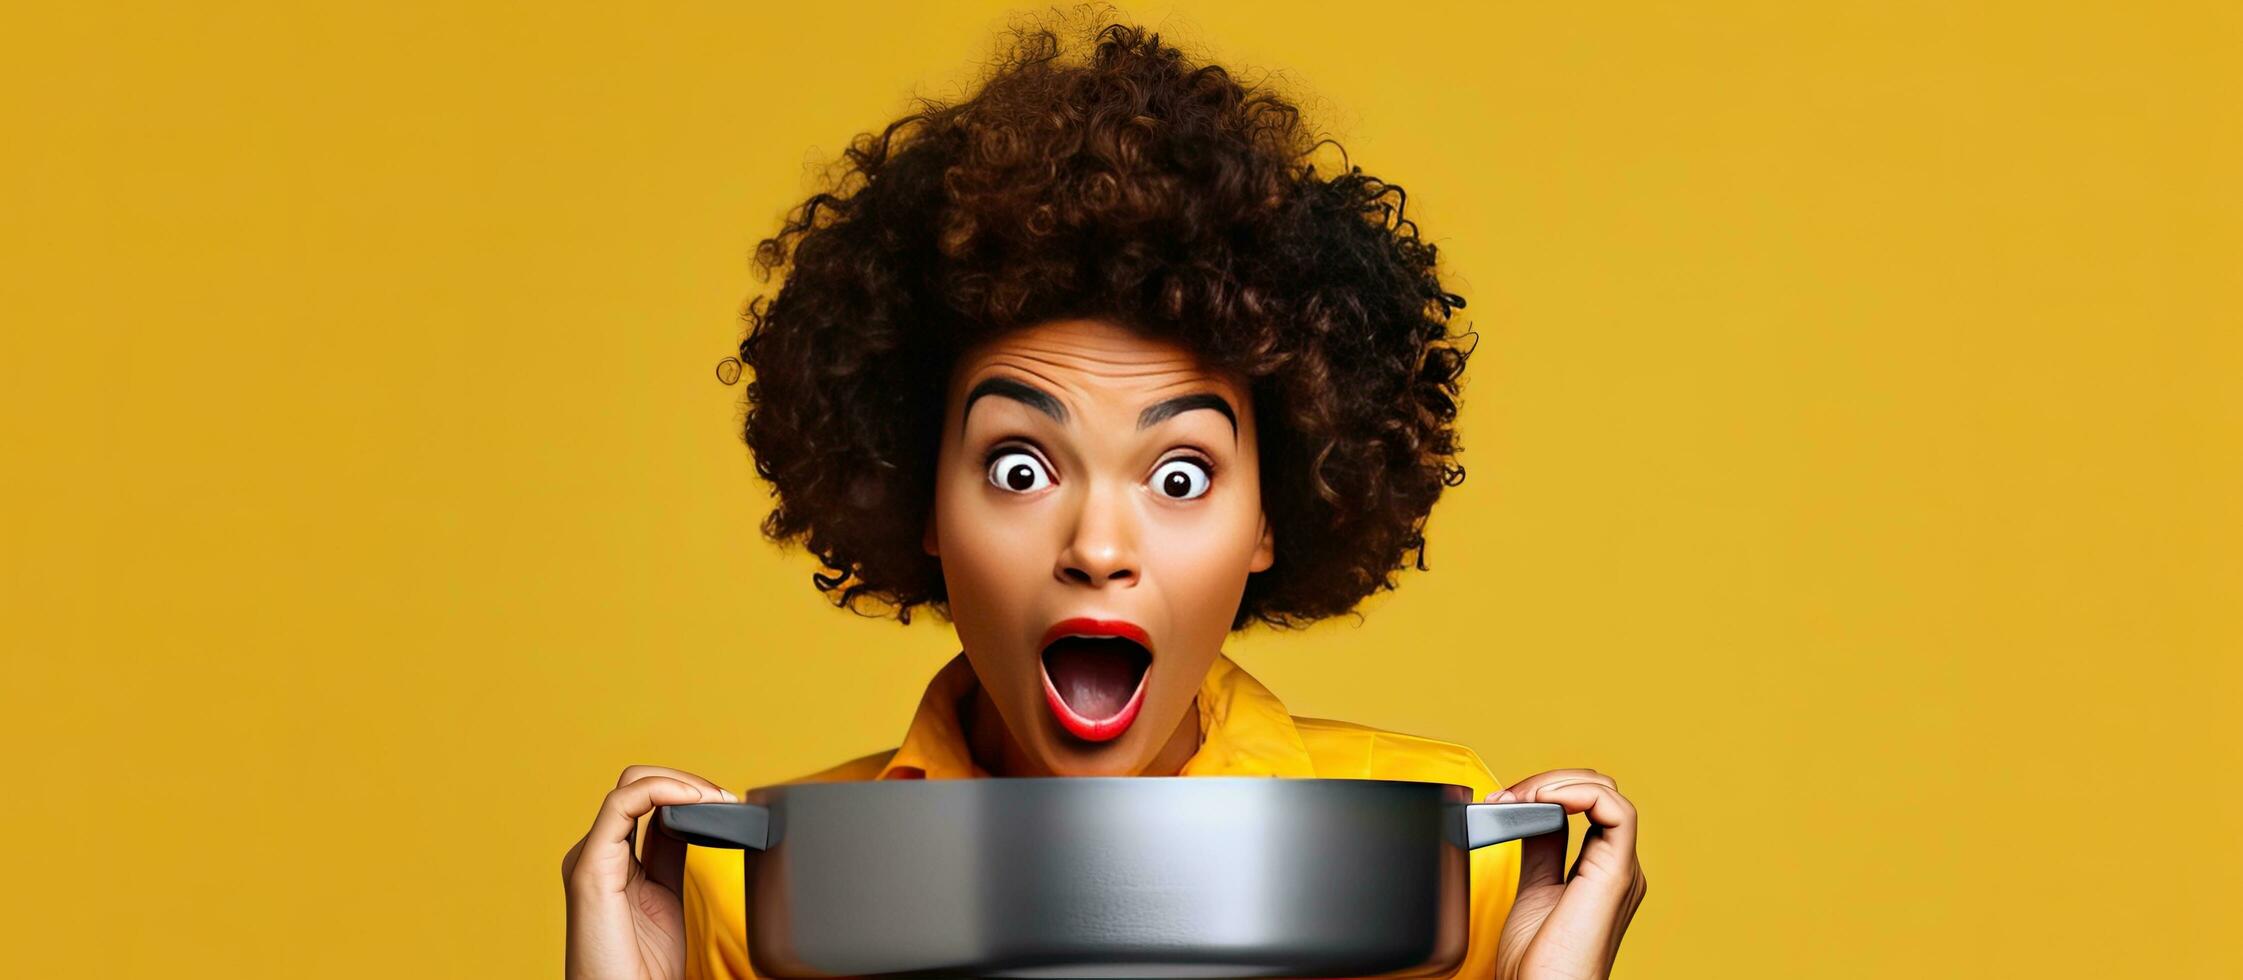 Young black chef woman posing with saucepan camera focused on her excited African American cook lady holding stewpot isolated on yellow background blank a photo